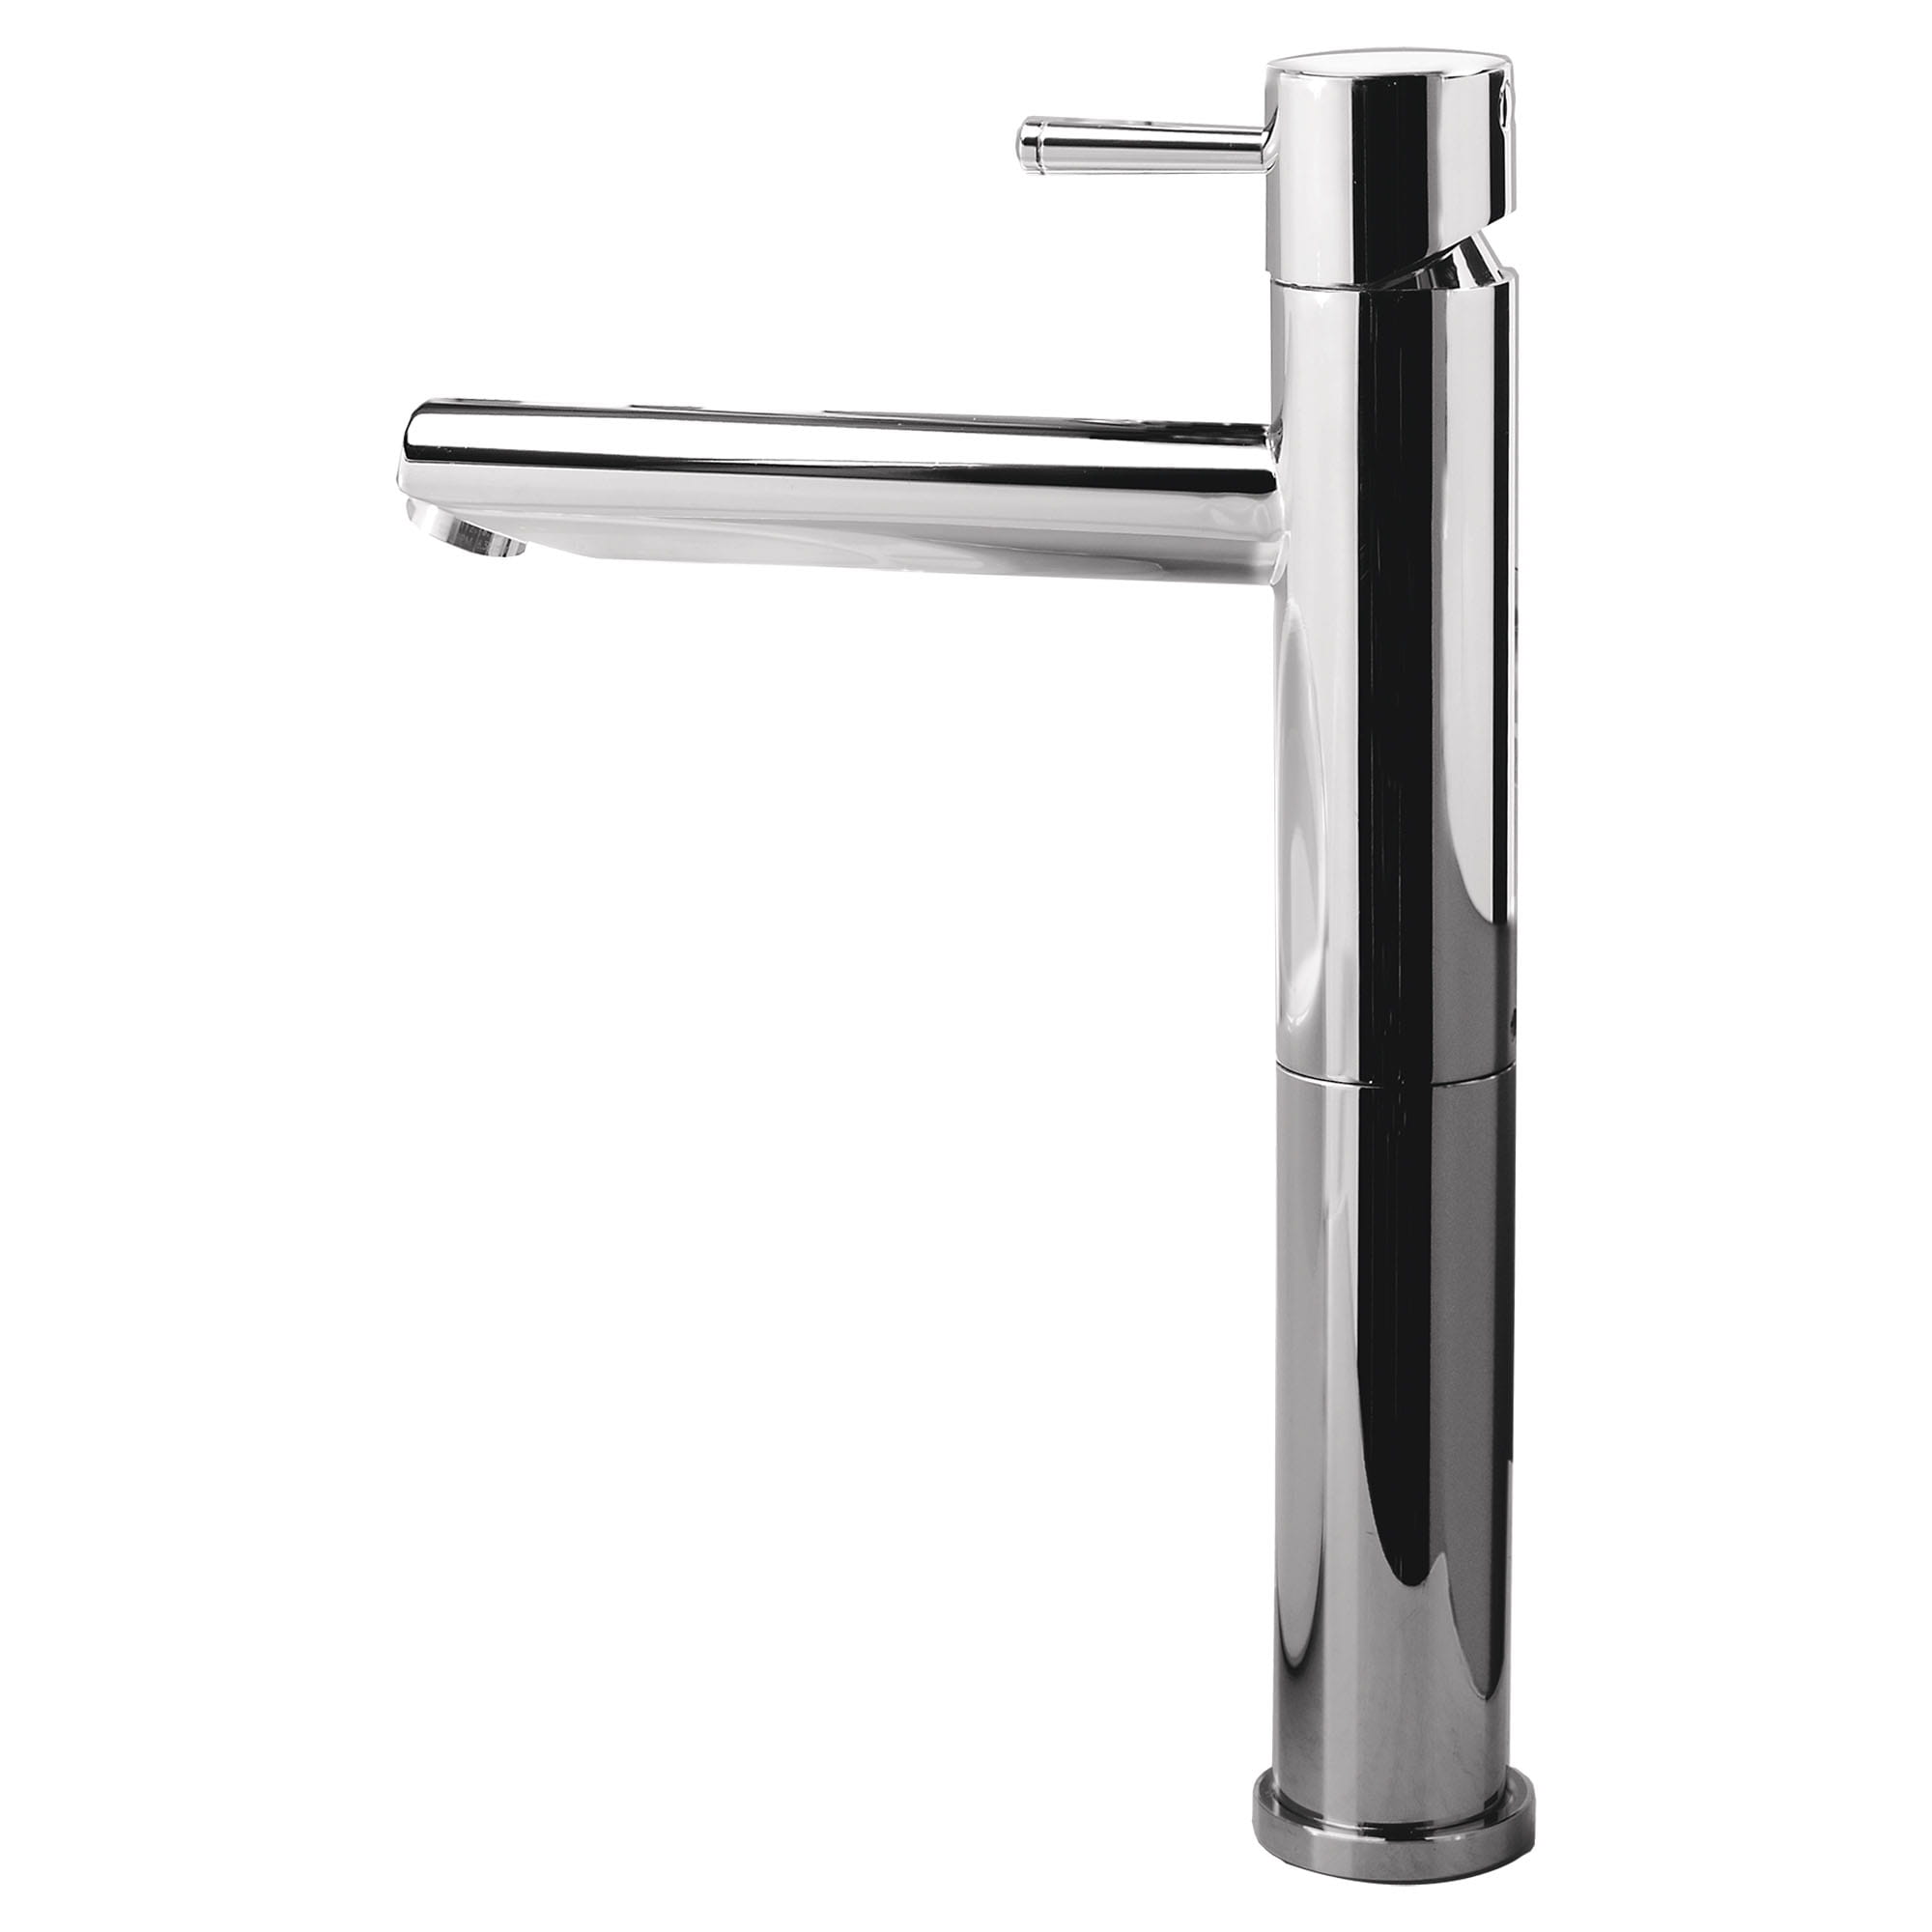 Serin Single Hole Single Handle Vessel Sink Faucet 12 gpm 45 L min With Lever Handle CHROME